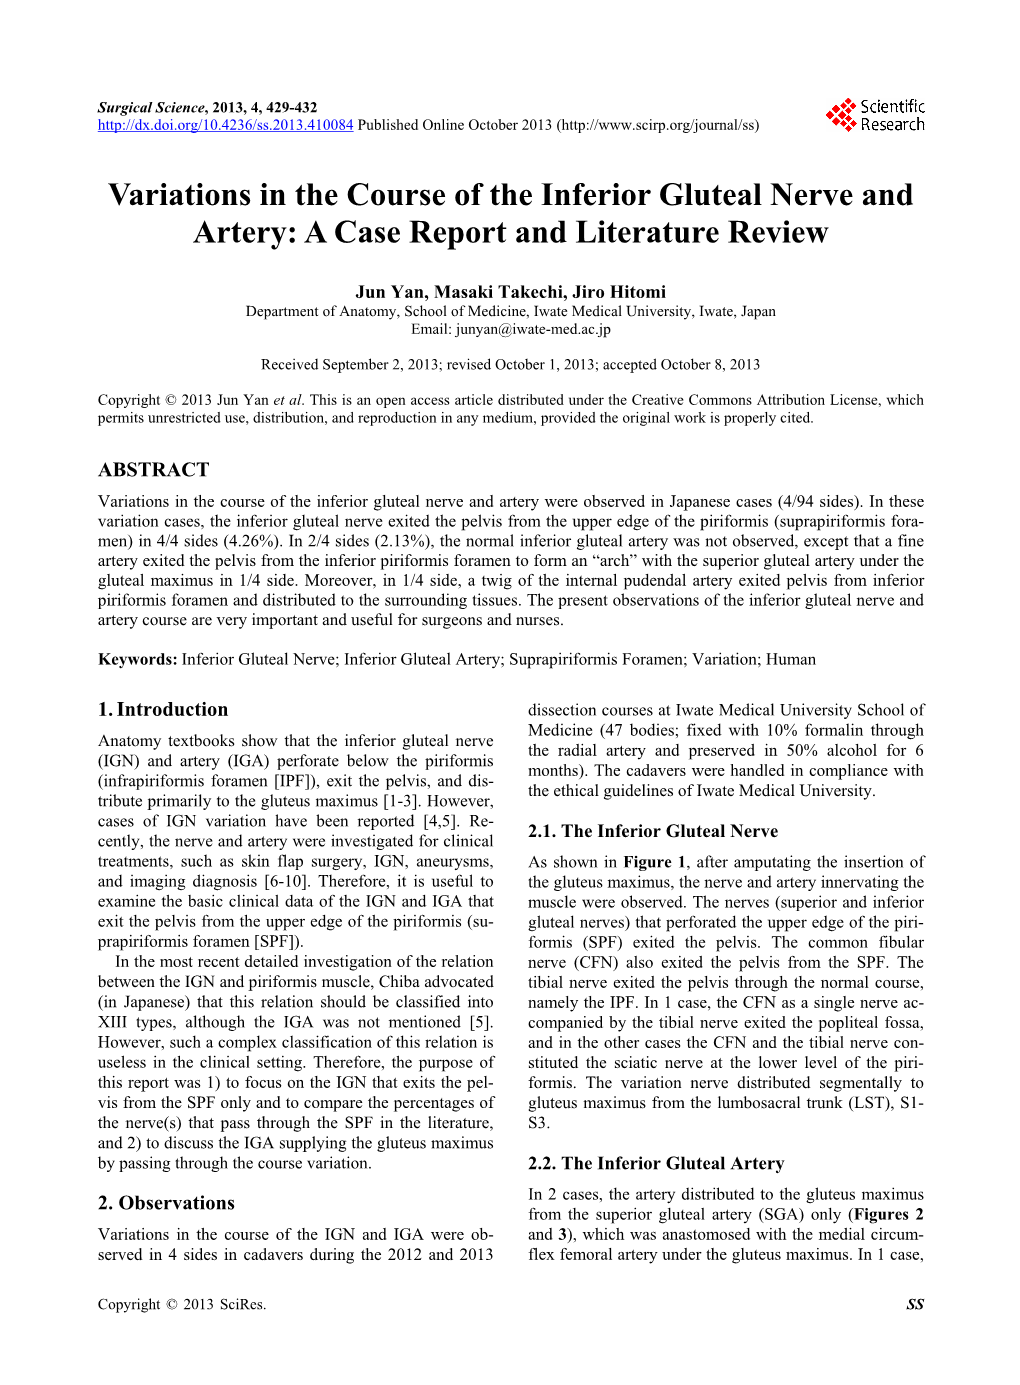 Variations in the Course of the Inferior Gluteal Nerve and Artery: a Case Report and Literature Review